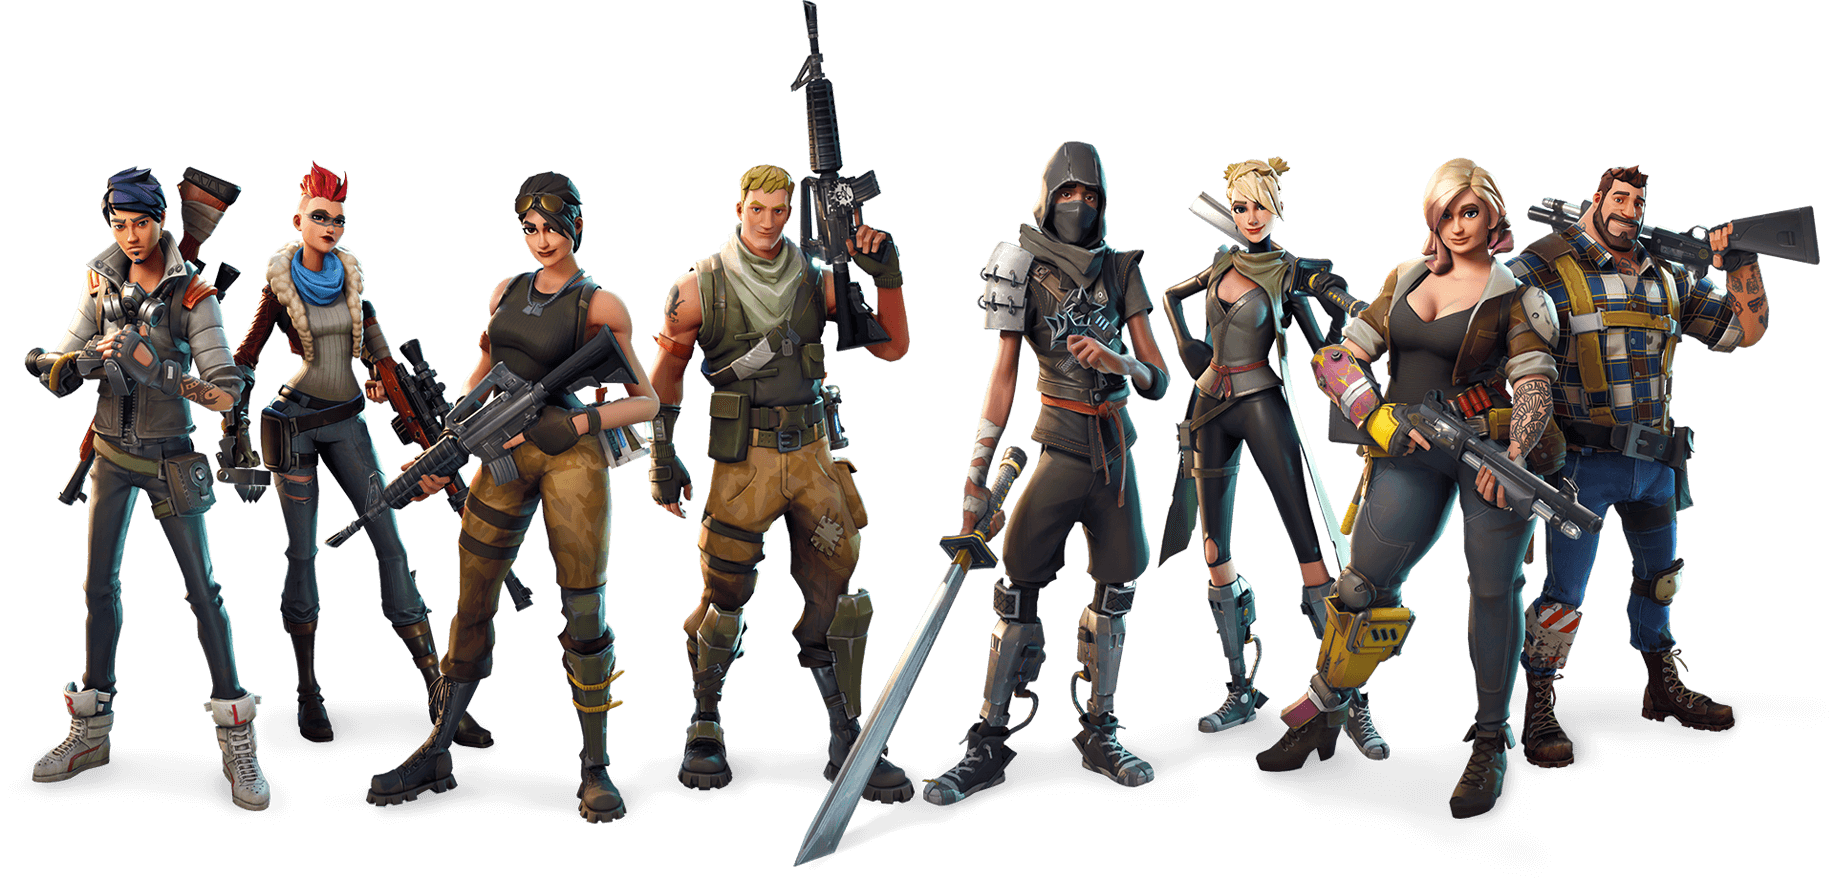 a class also known as hero is a special group of characters that a player can choose to use during fortnite gameplay classes are broken down into - fortnite founders pack difference